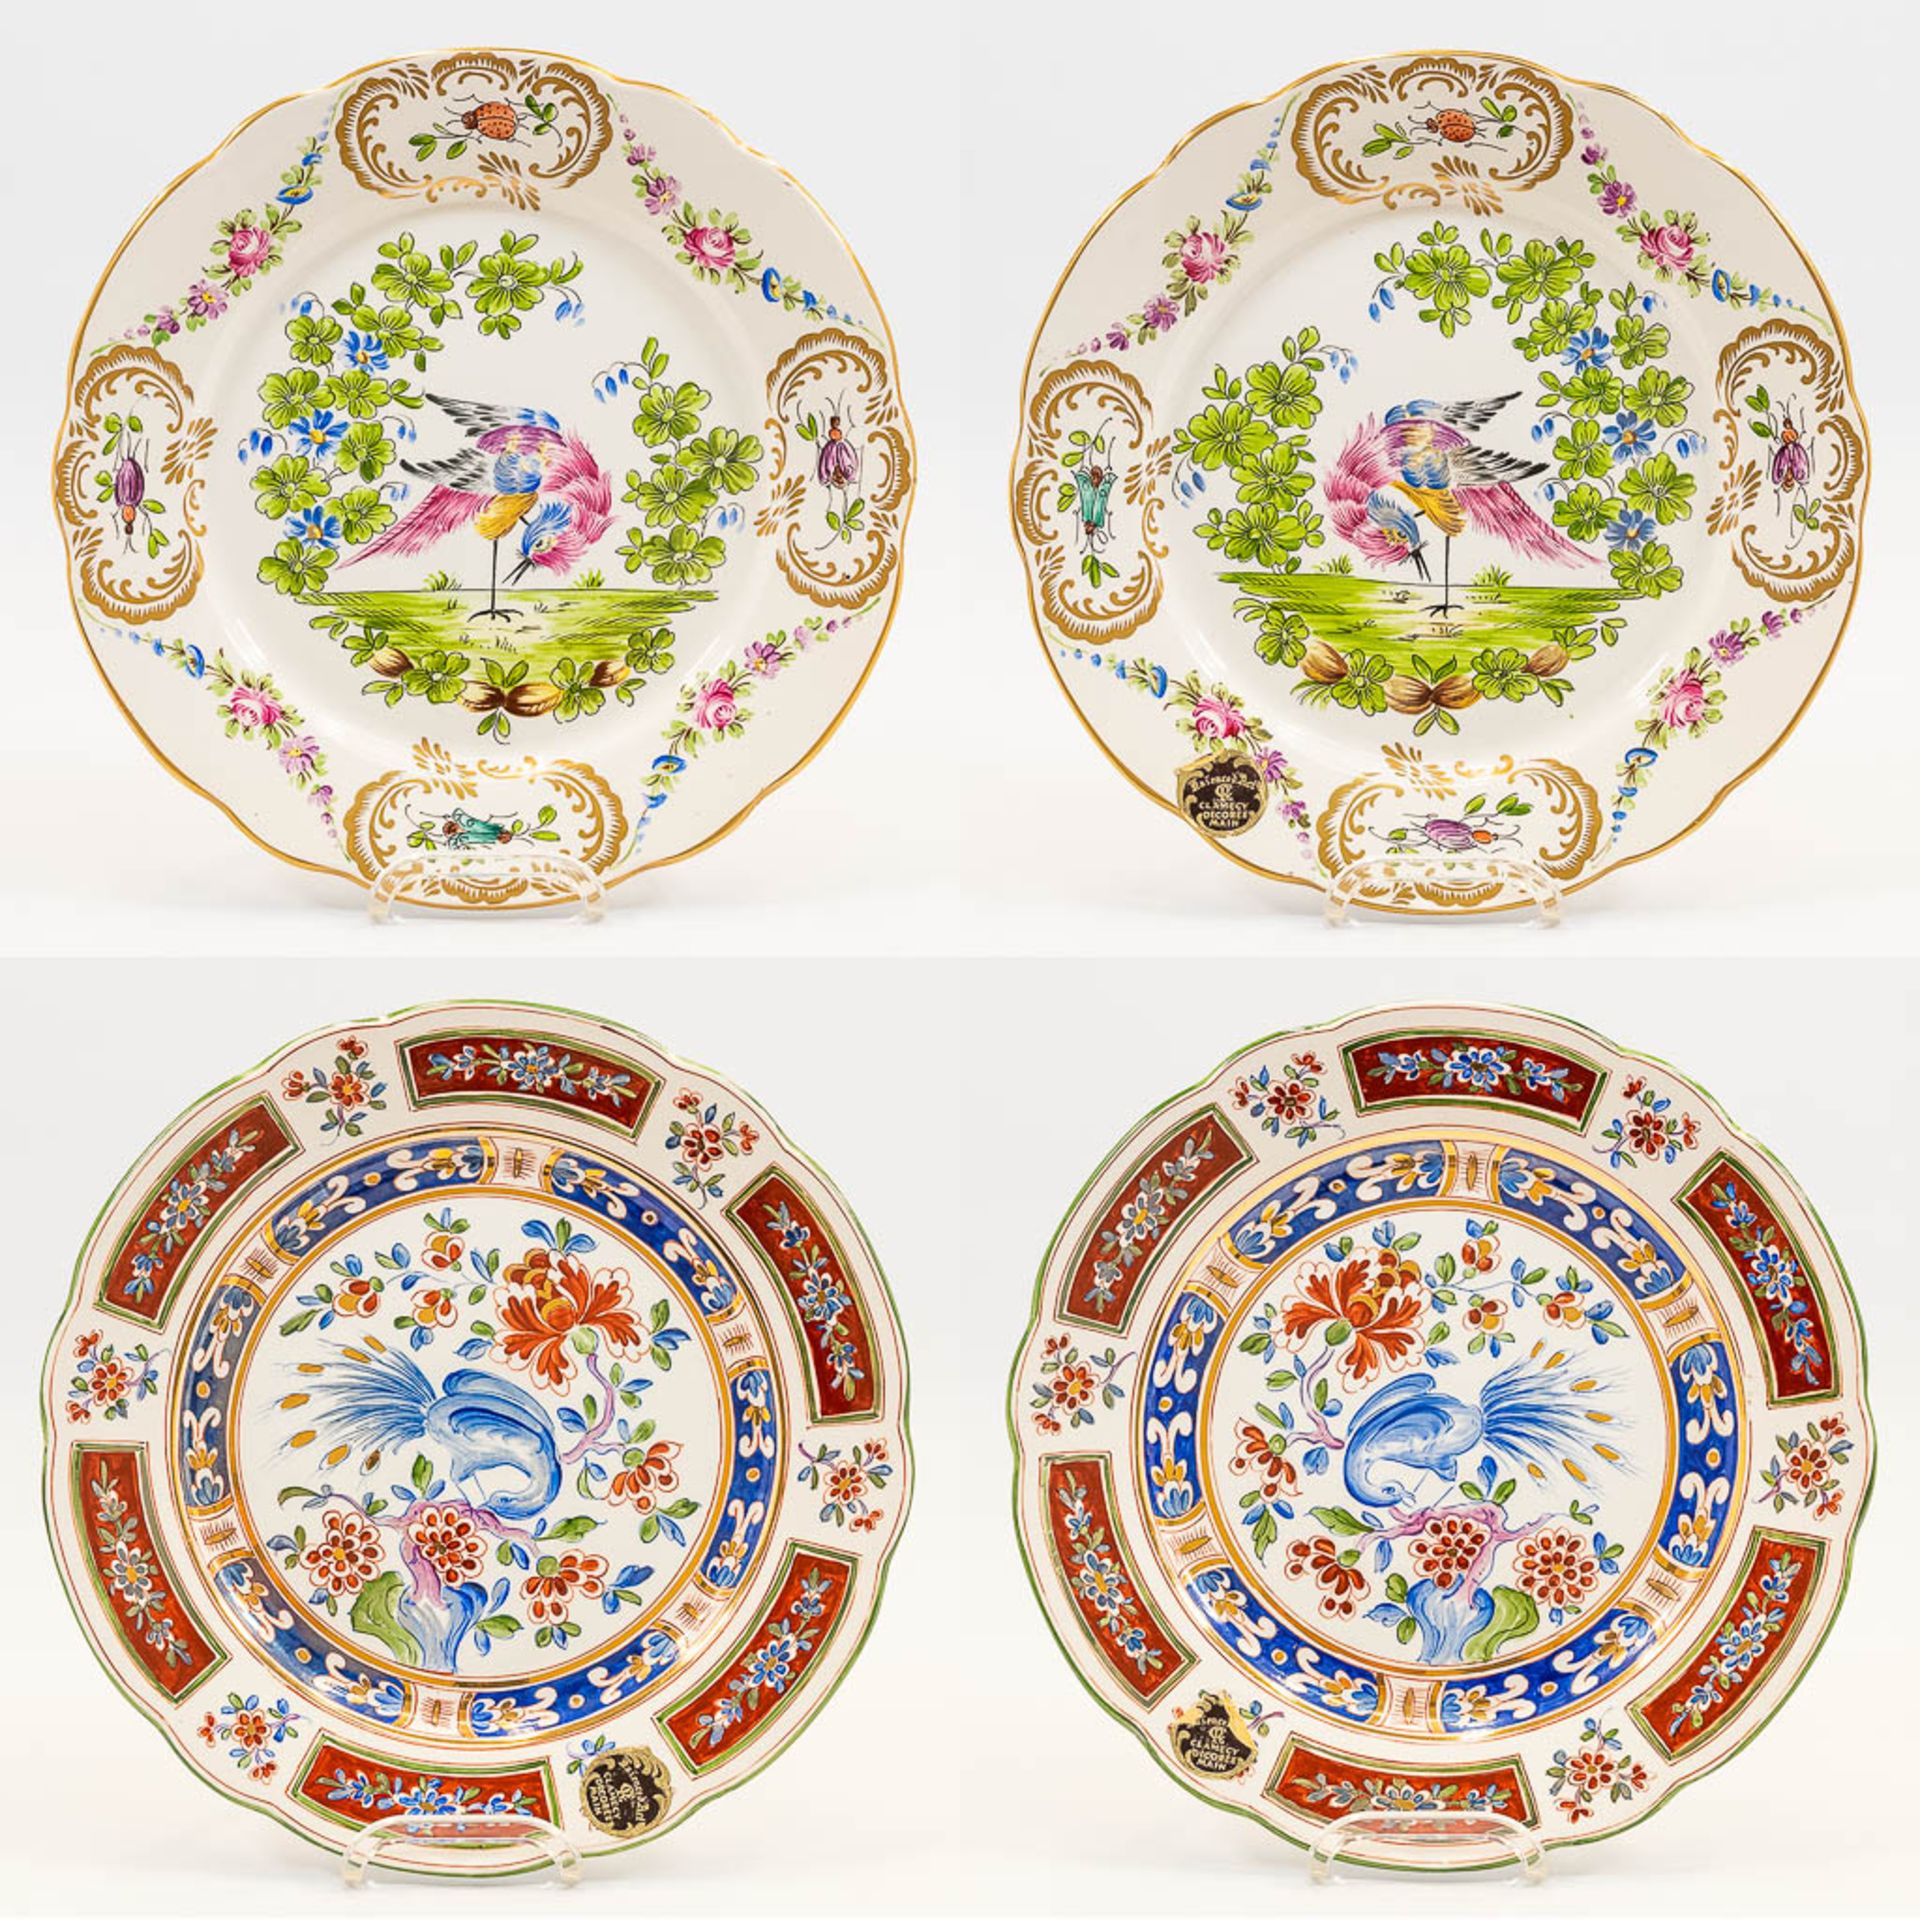 A collection of 2 pairs of faience display plates with hand-painted decor and made in Clamecy, Franc - Image 11 of 17